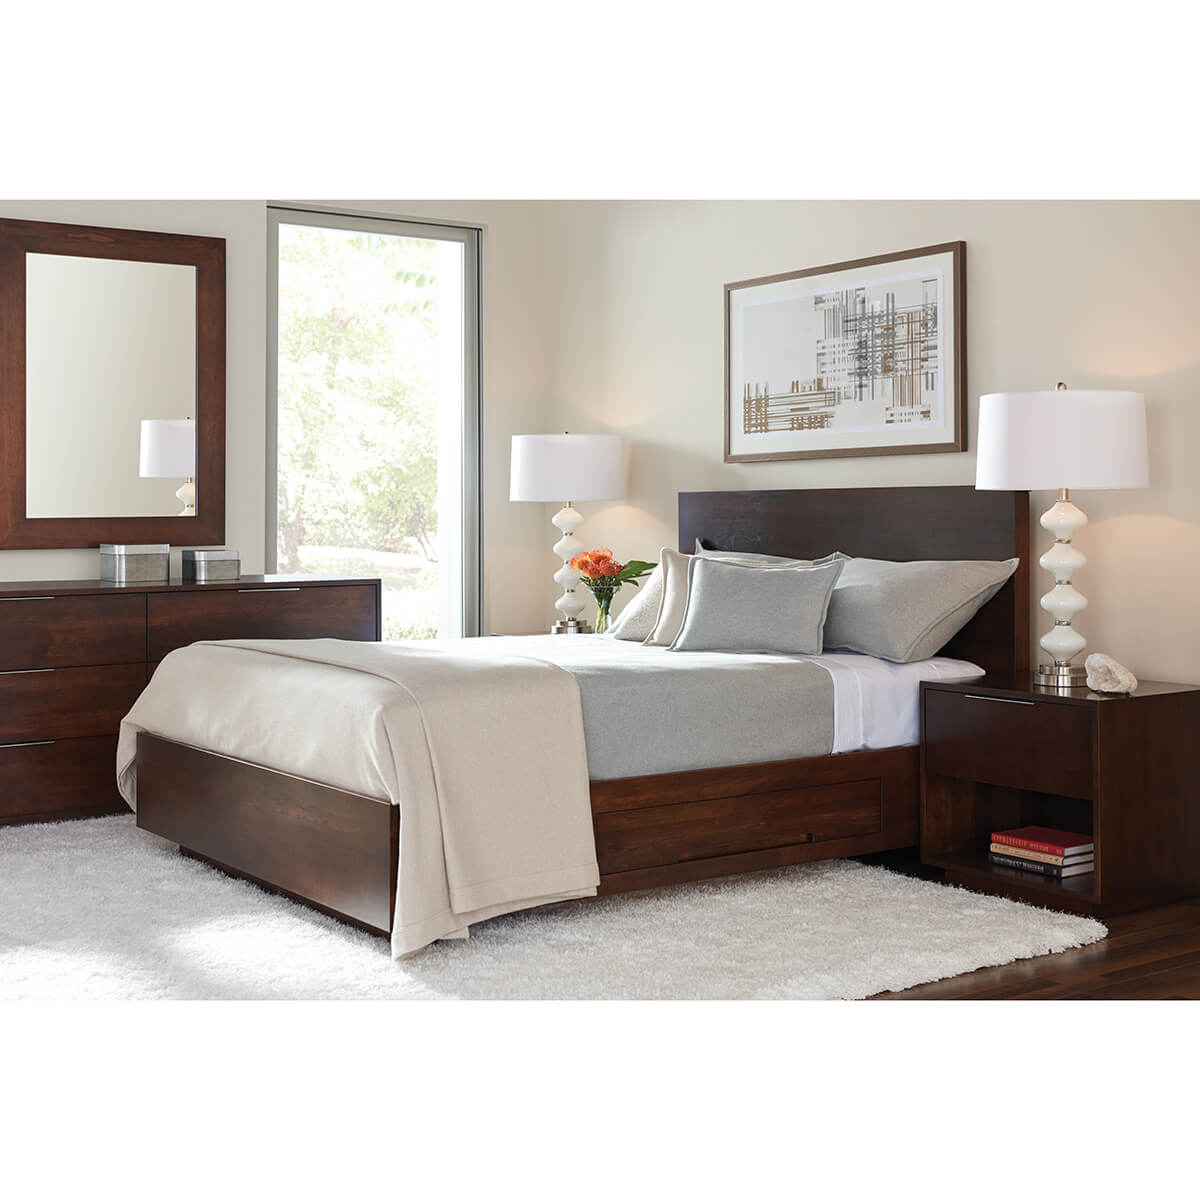 Read more about the article Tara Dartmoor Bedroom Collection